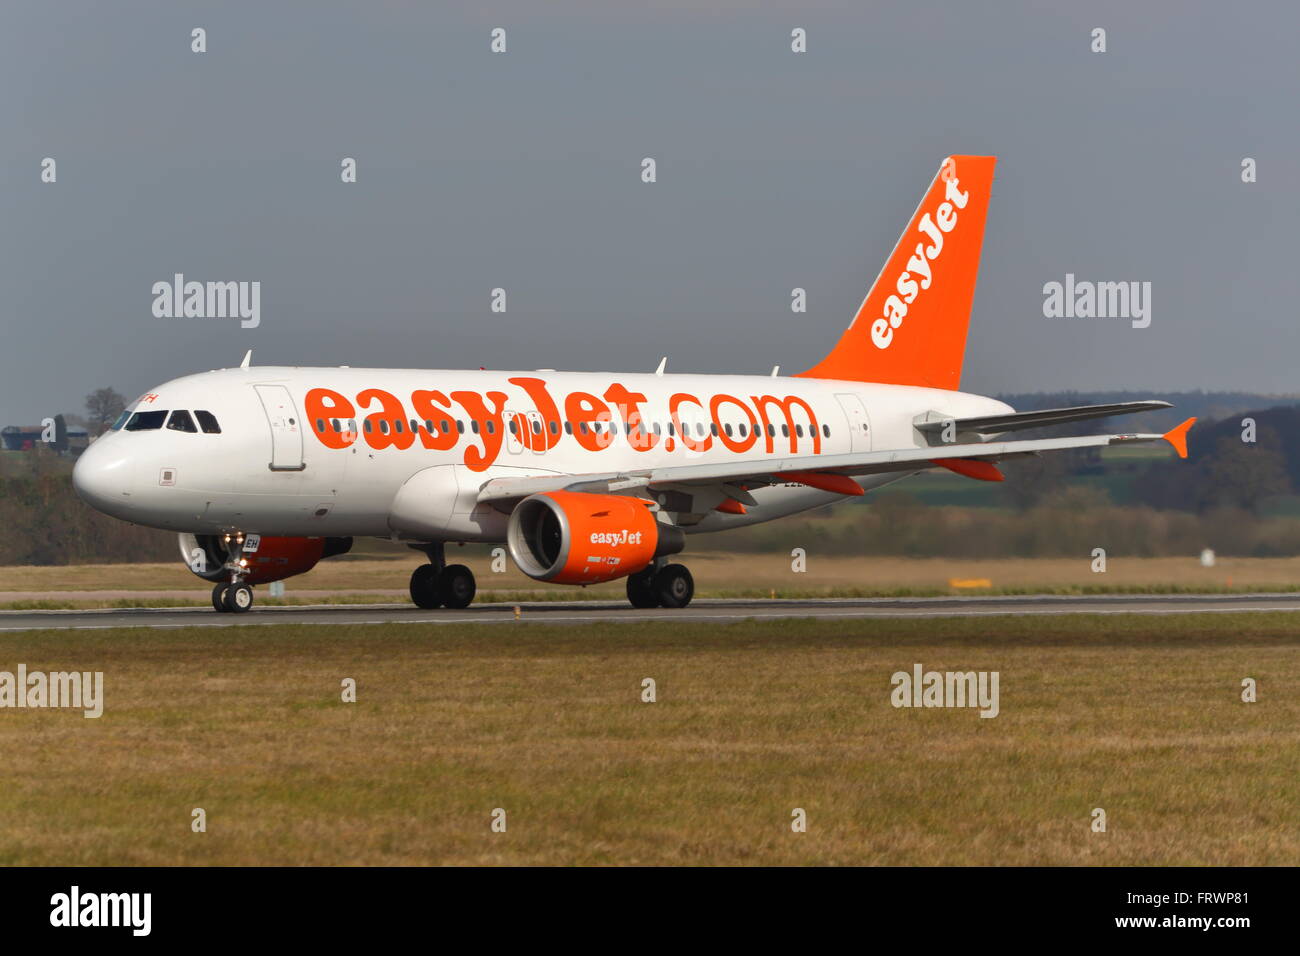 Low-cost airline Easyjet Airbus A319 G-EZEH landing at London Luton Airport, UK Stock Photo